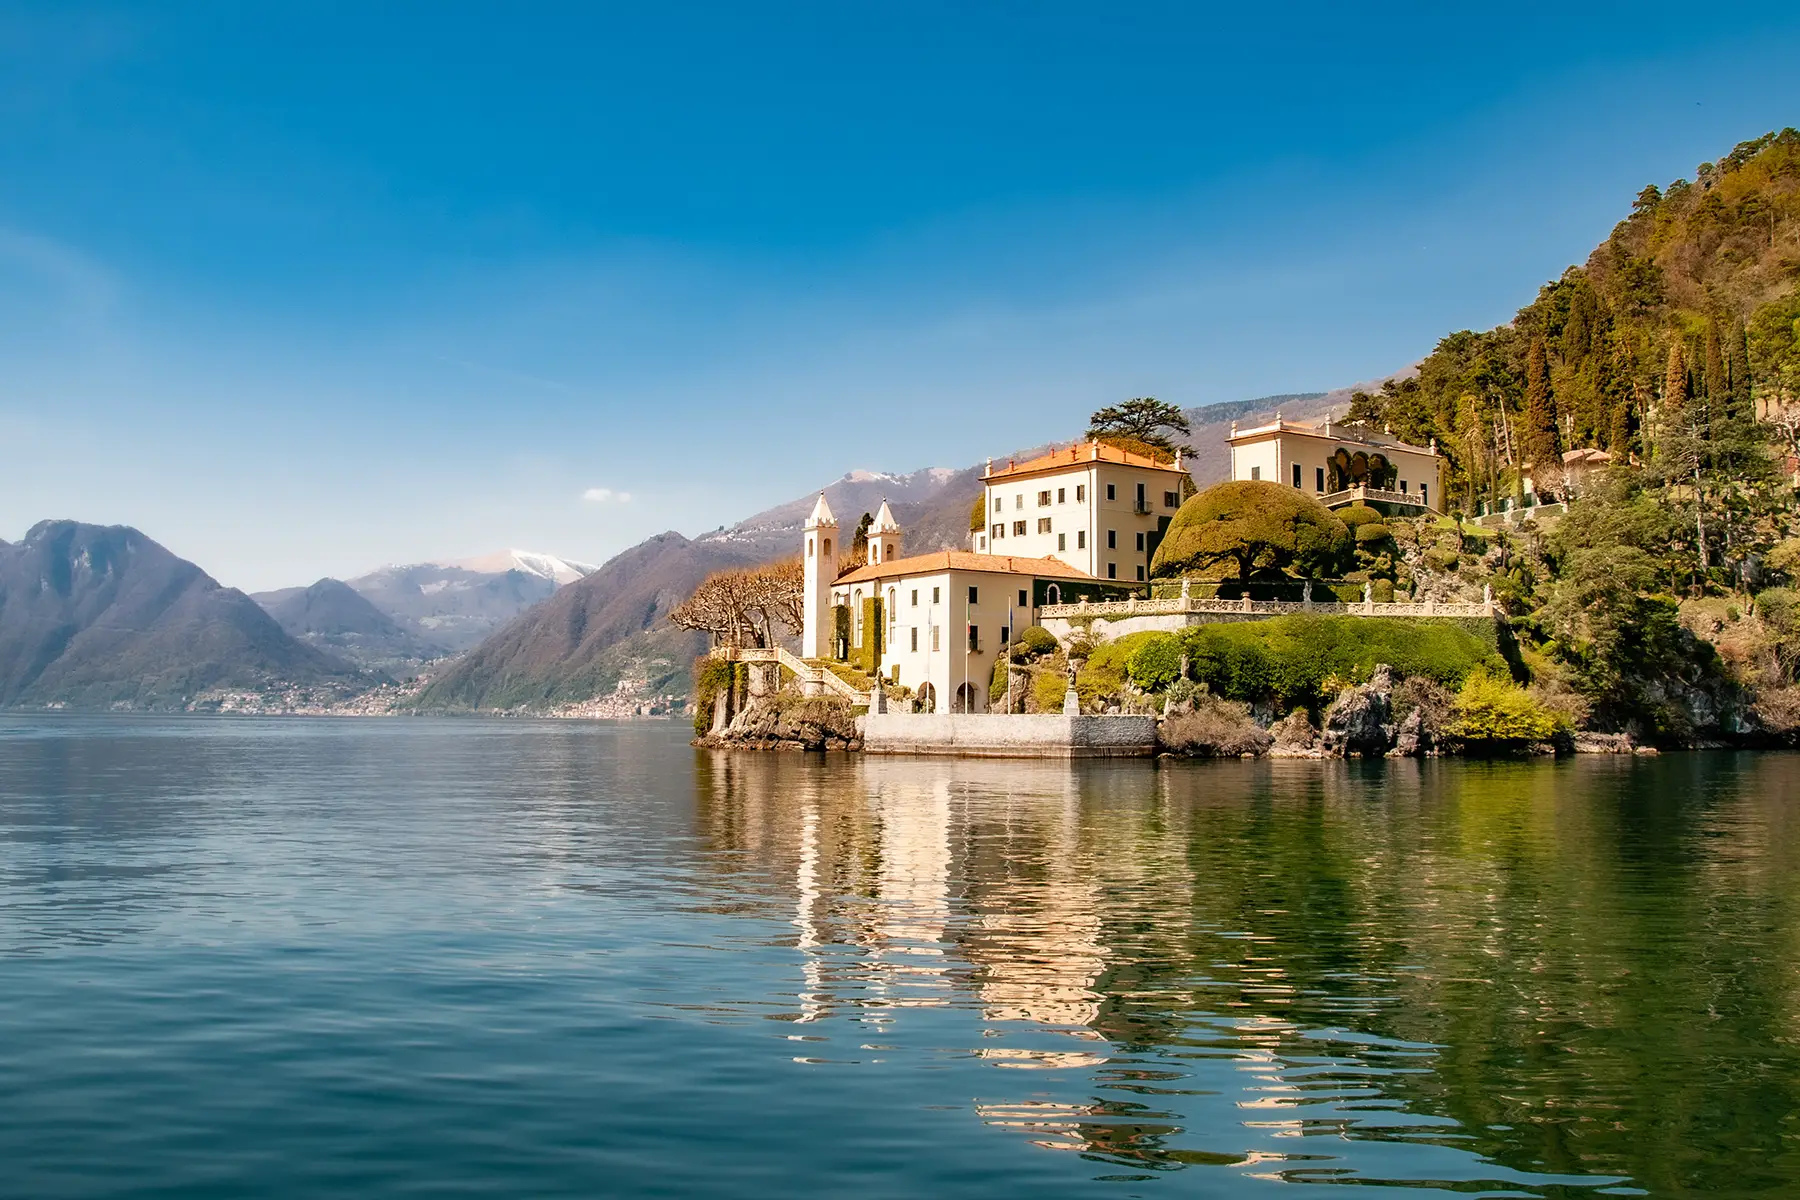 A view of Lake Como on a beautiful sunny day, house in the distance.